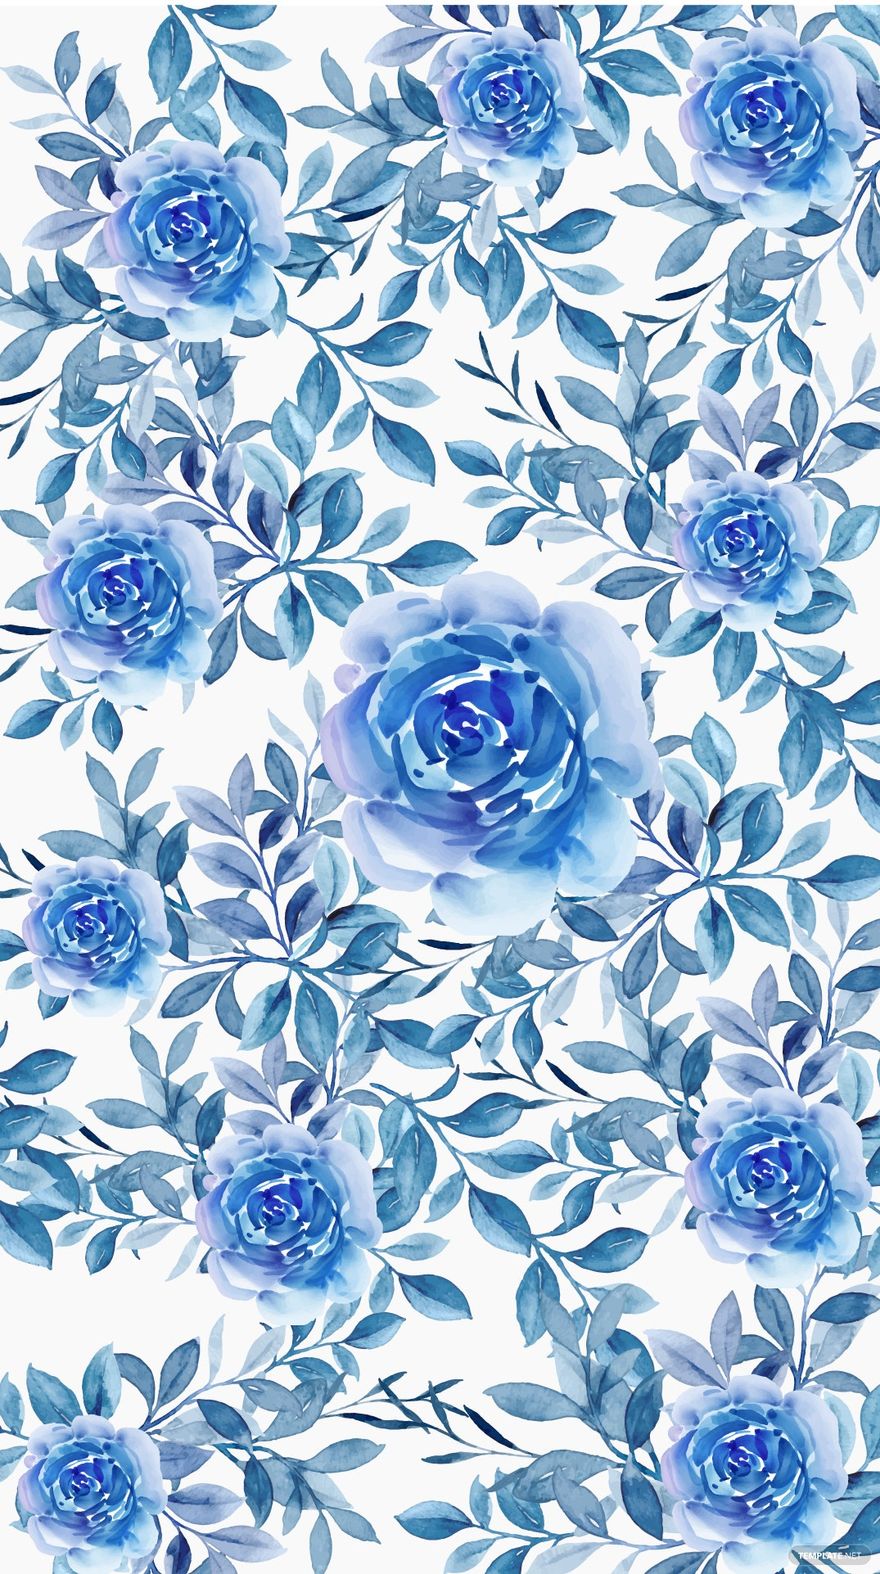 Free Blue Floral Watercolor Background